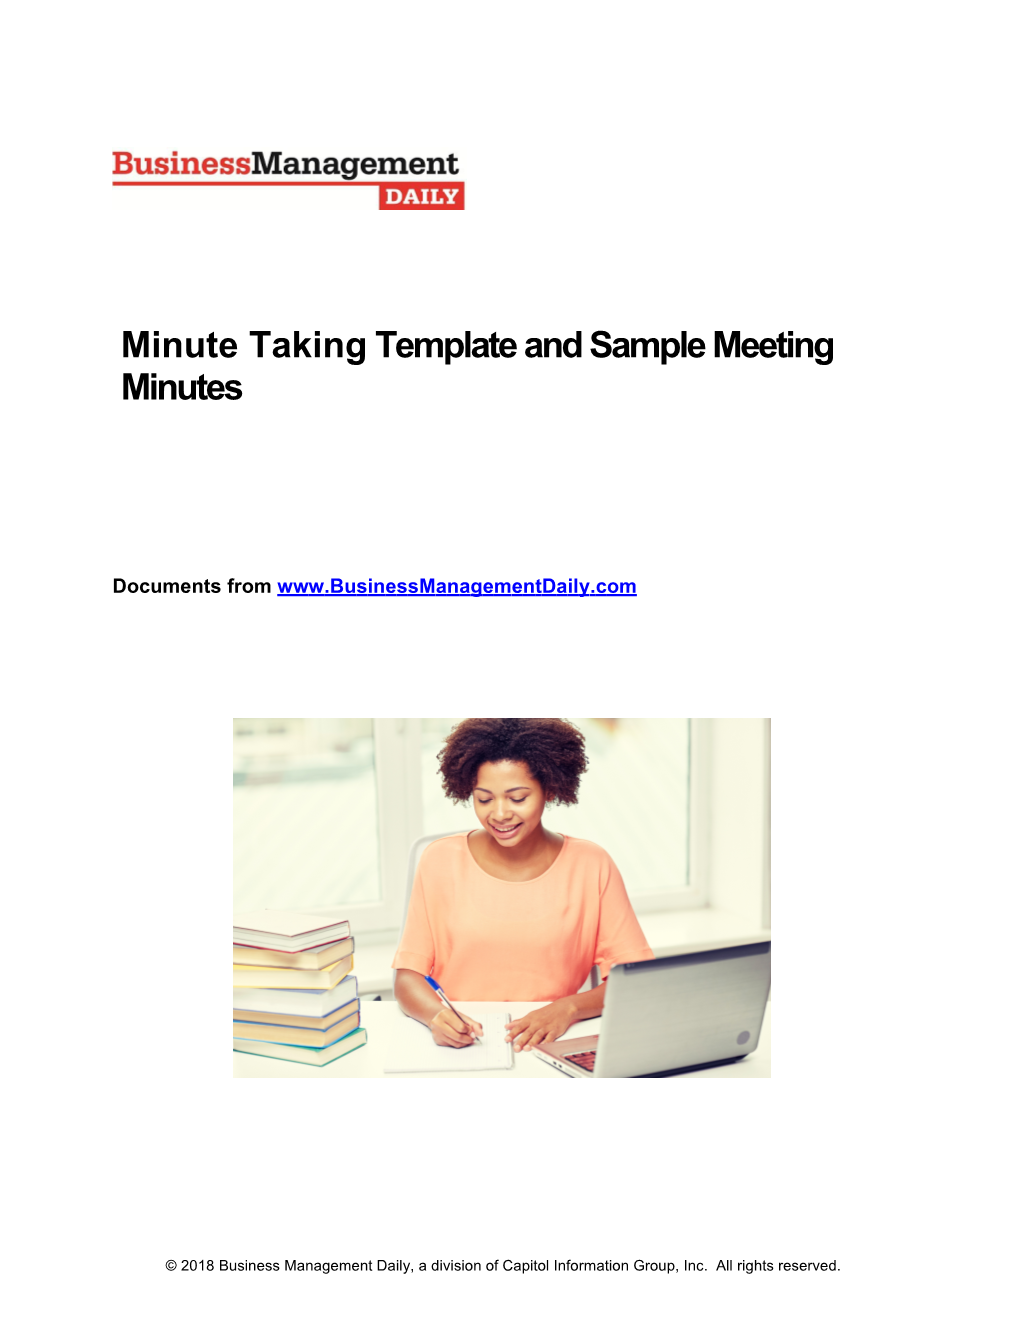 Minute Takingtemplate and Sample Meeting Minutes